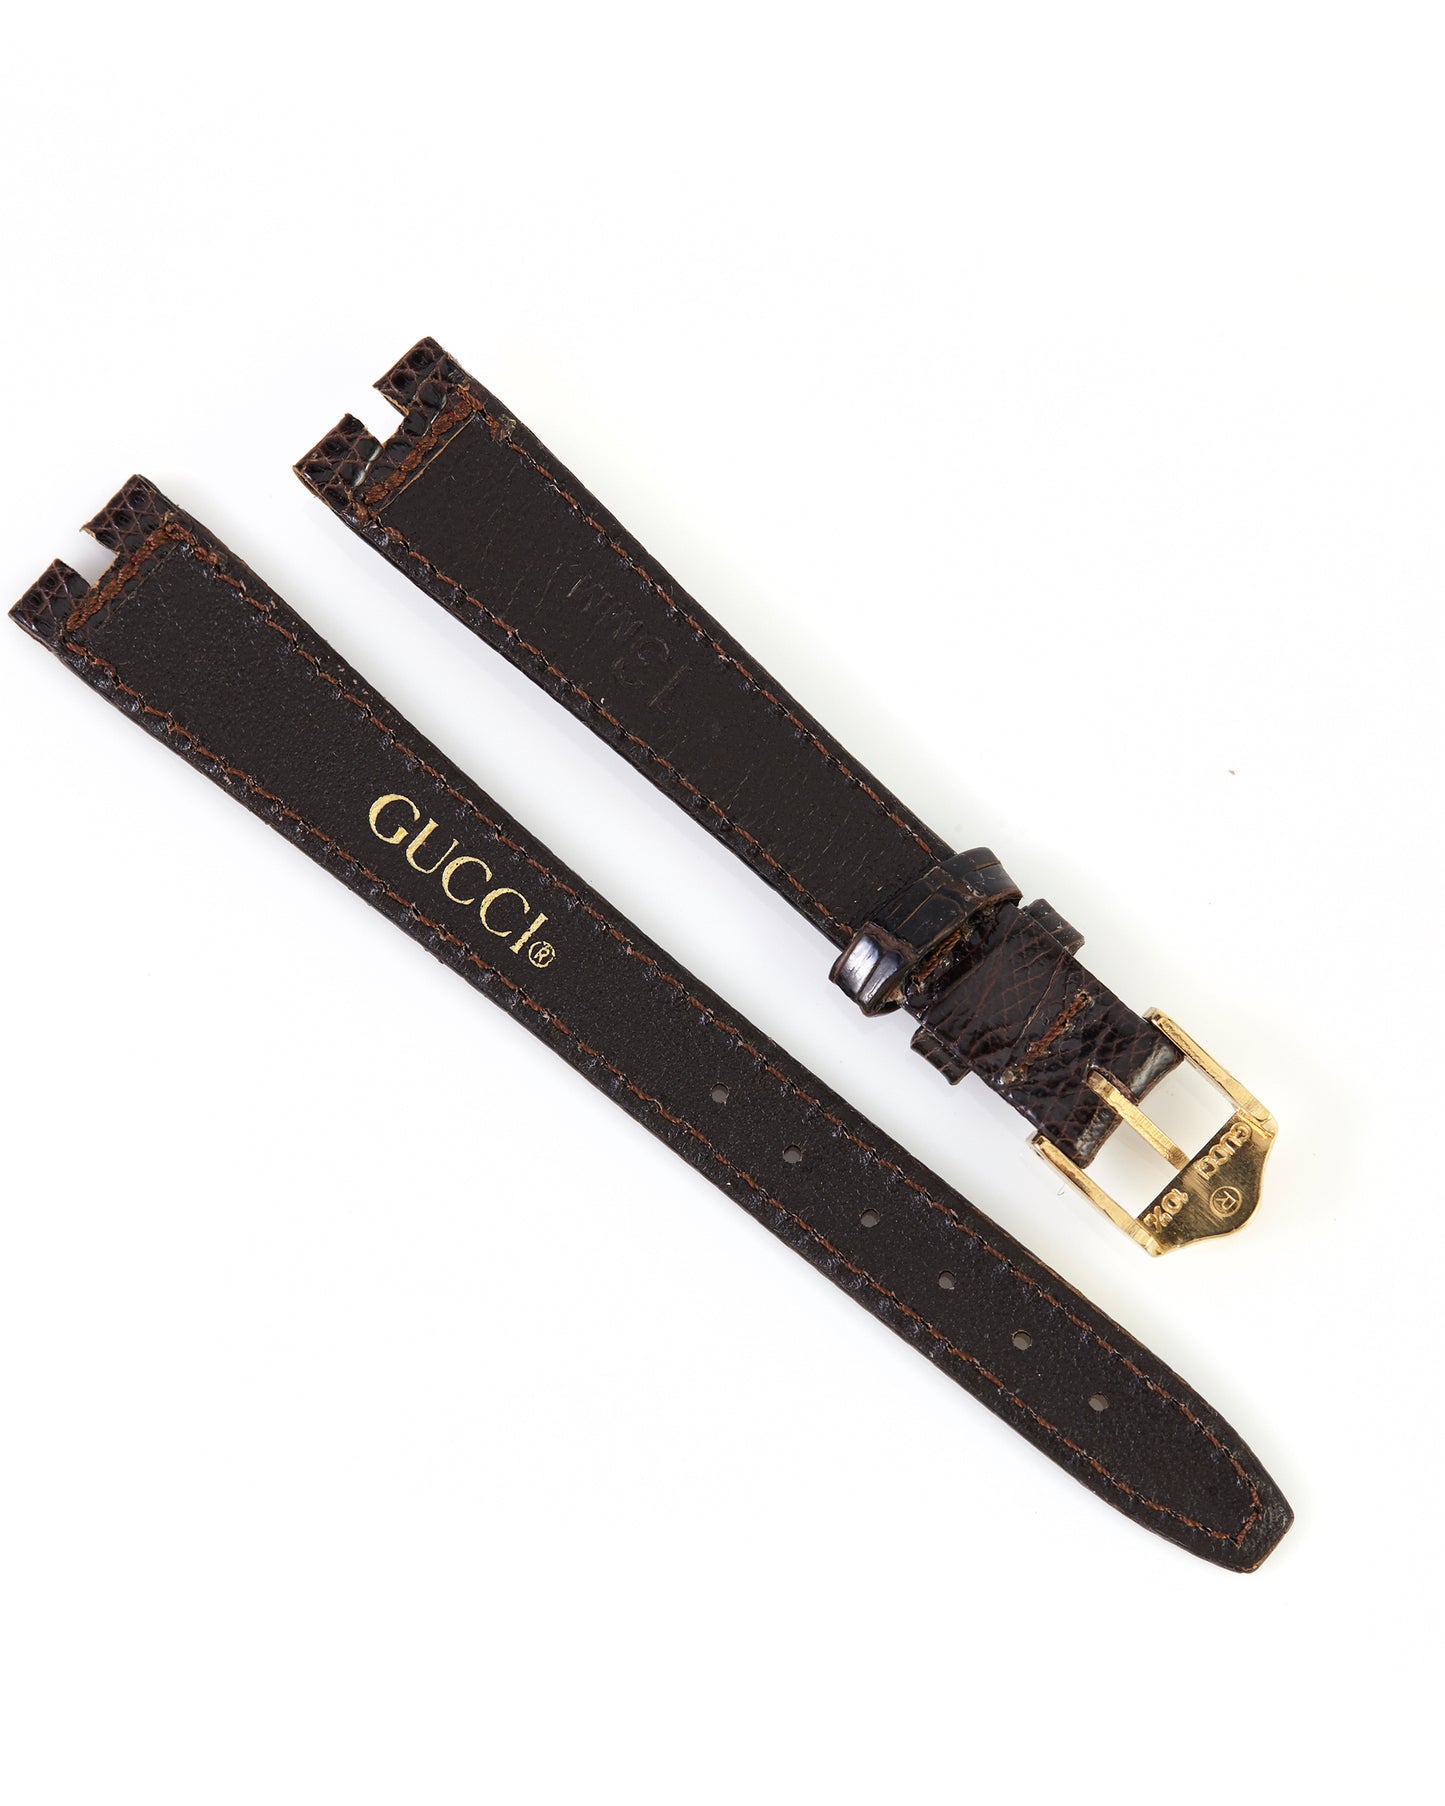 Gucci 3400L 13mm Brown Ladies Leather Band w/ 10mm Original Gucci Buckle